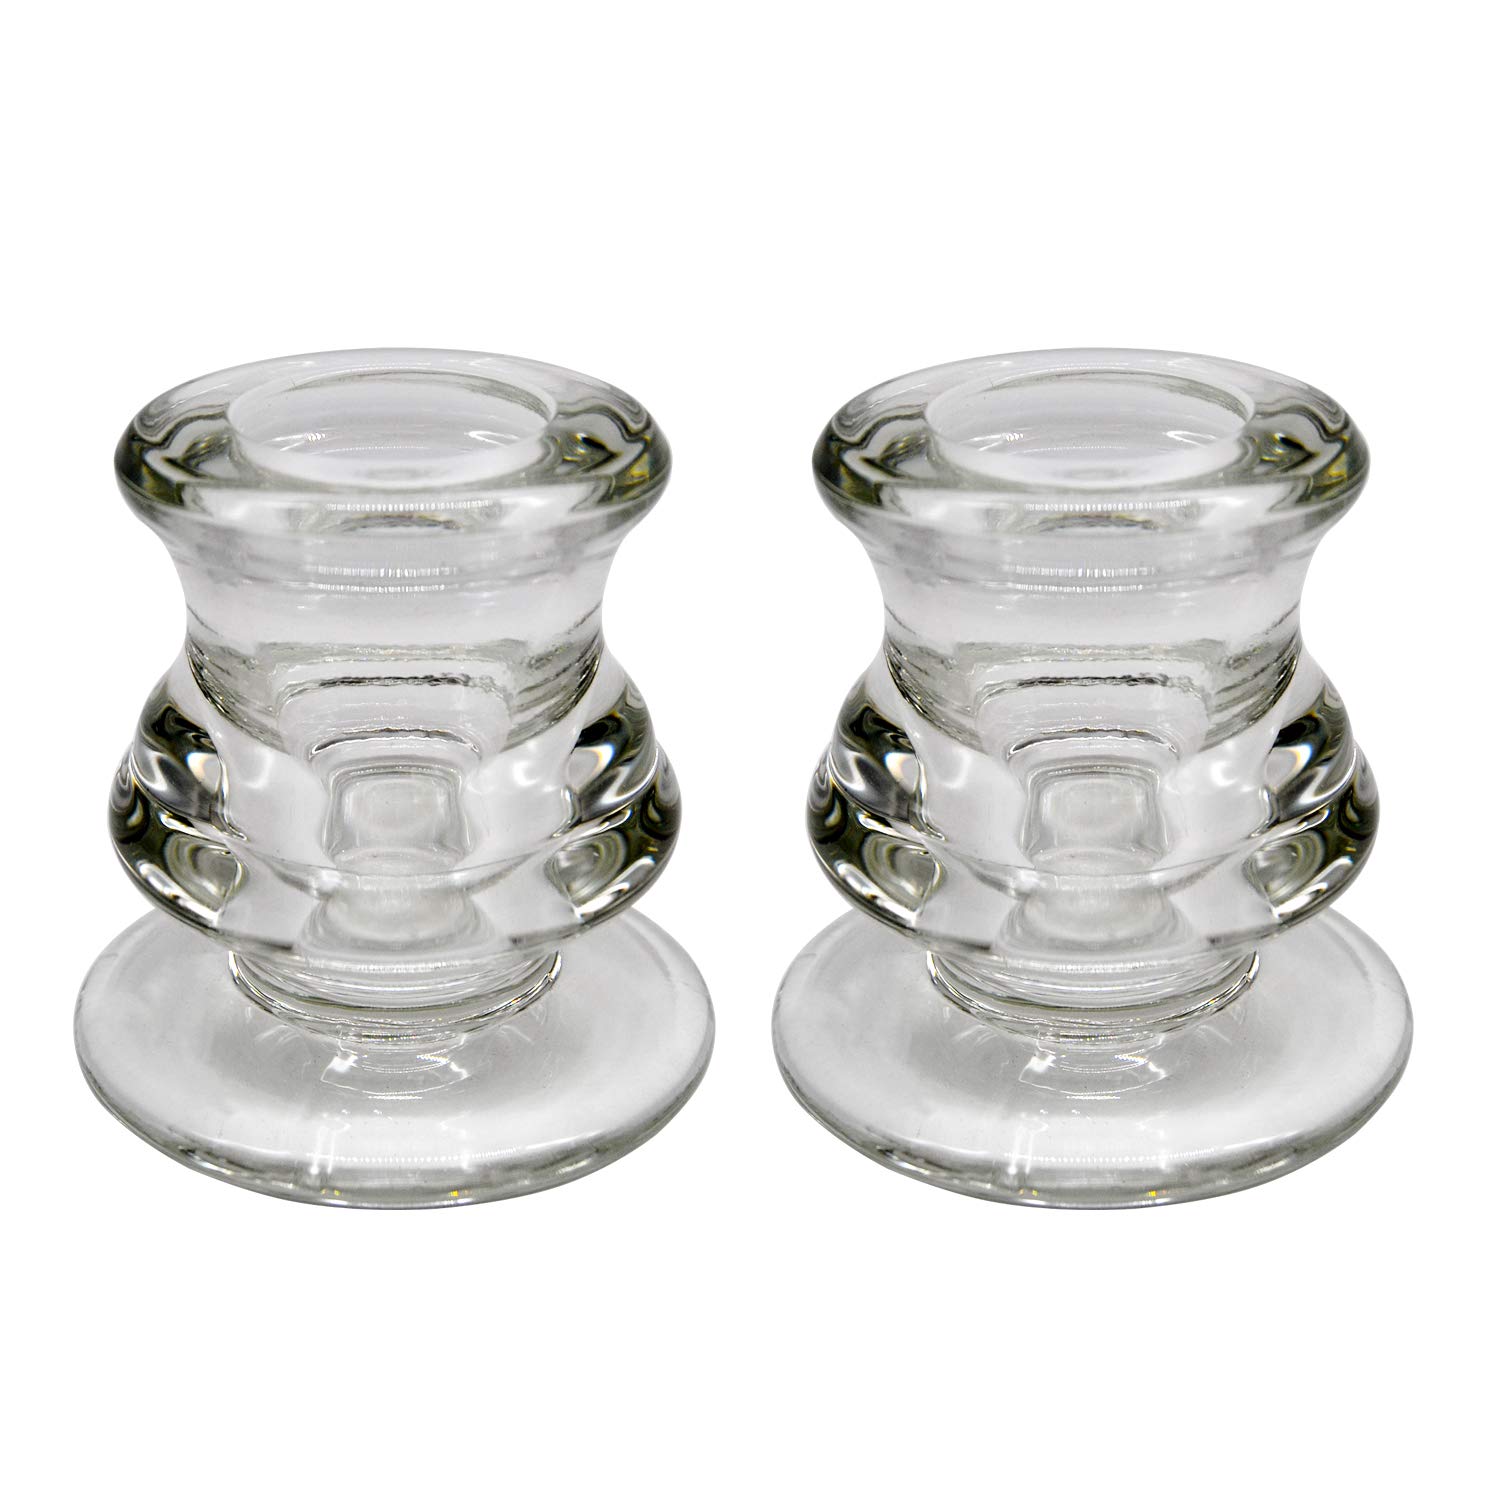 Glass taper candle holders